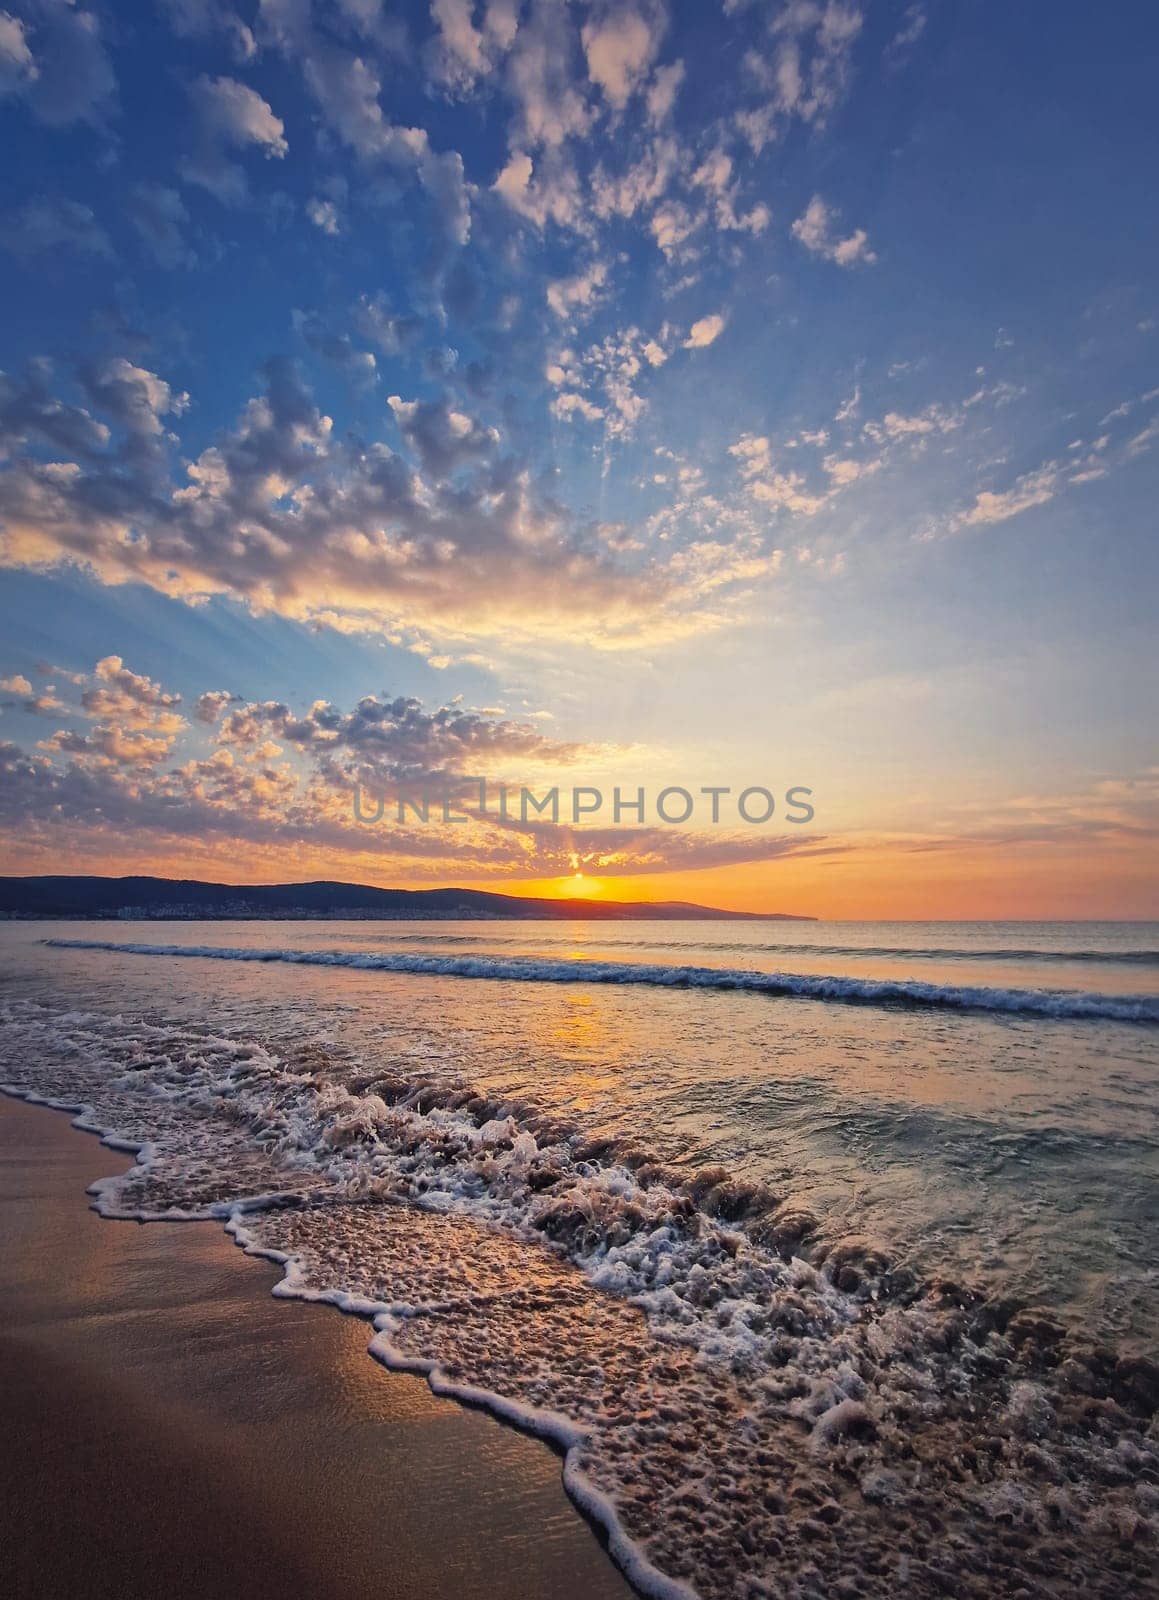 Seascape dawn scene, natural vertical background. Early morning on the beach with a peaceful view to the sunrise above the hills. Calm summer holiday, sea travel concept by psychoshadow